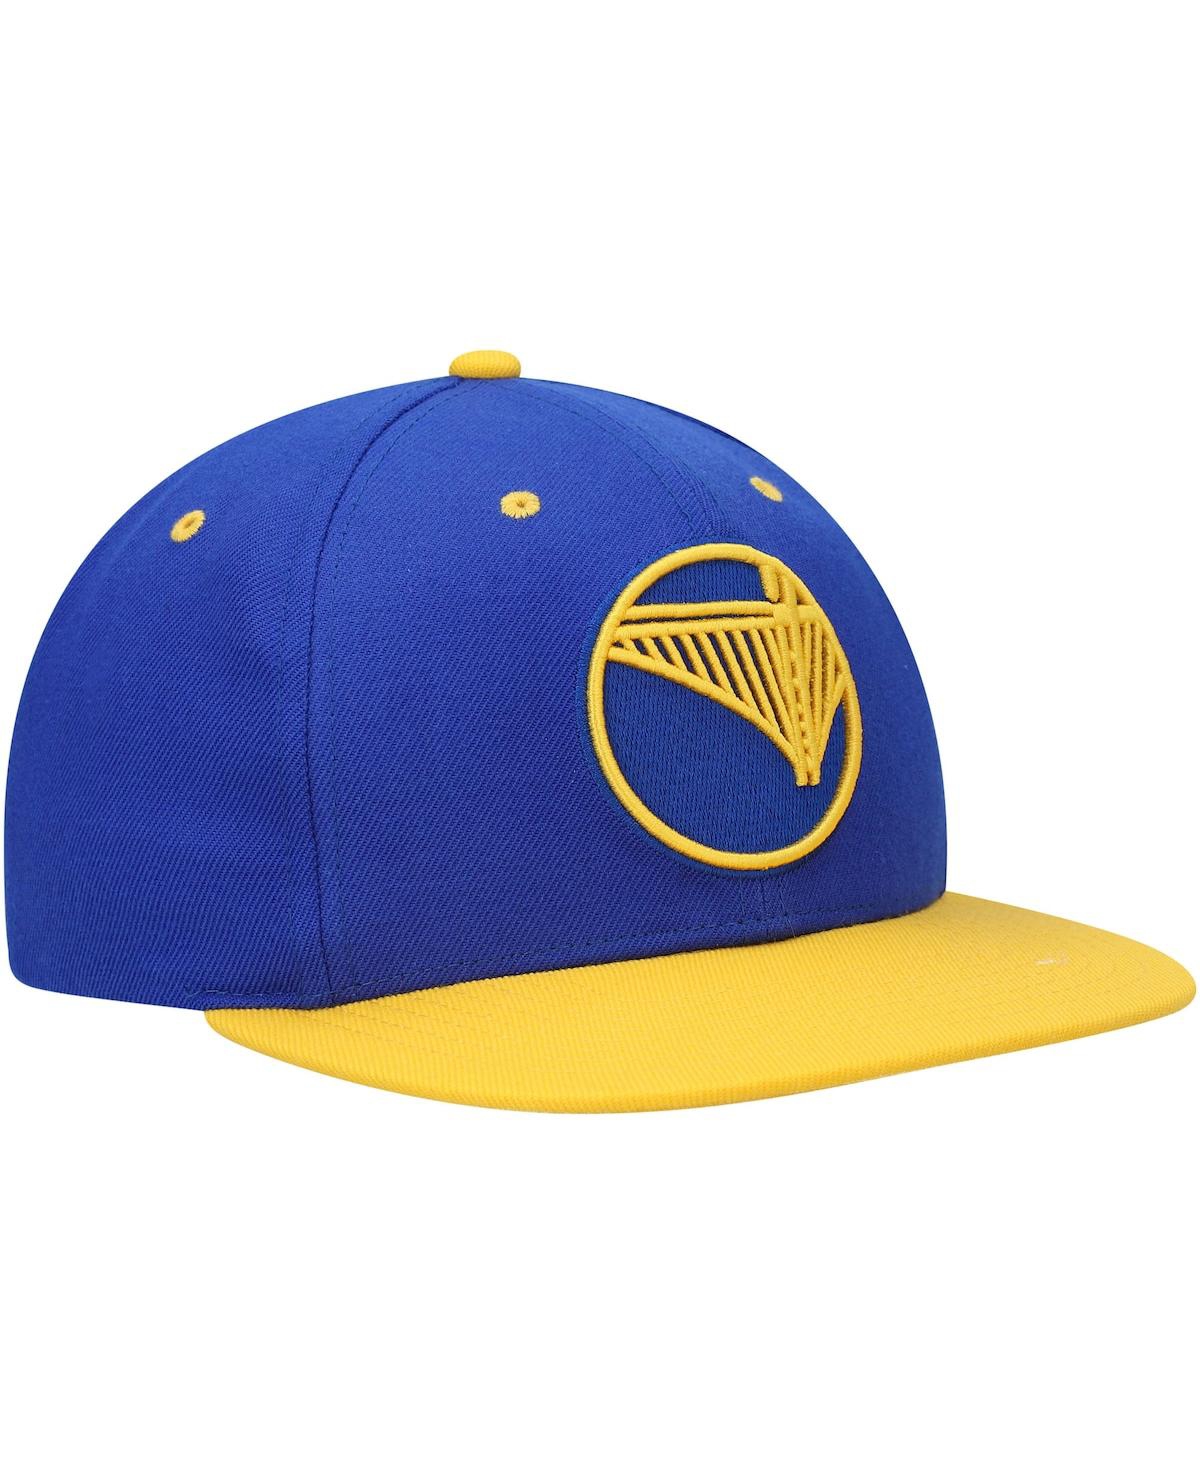 Shop Mitchell & Ness Men's Royal And Gold Golden State Warriors Upside Down Snapback Hat In Royal,gold